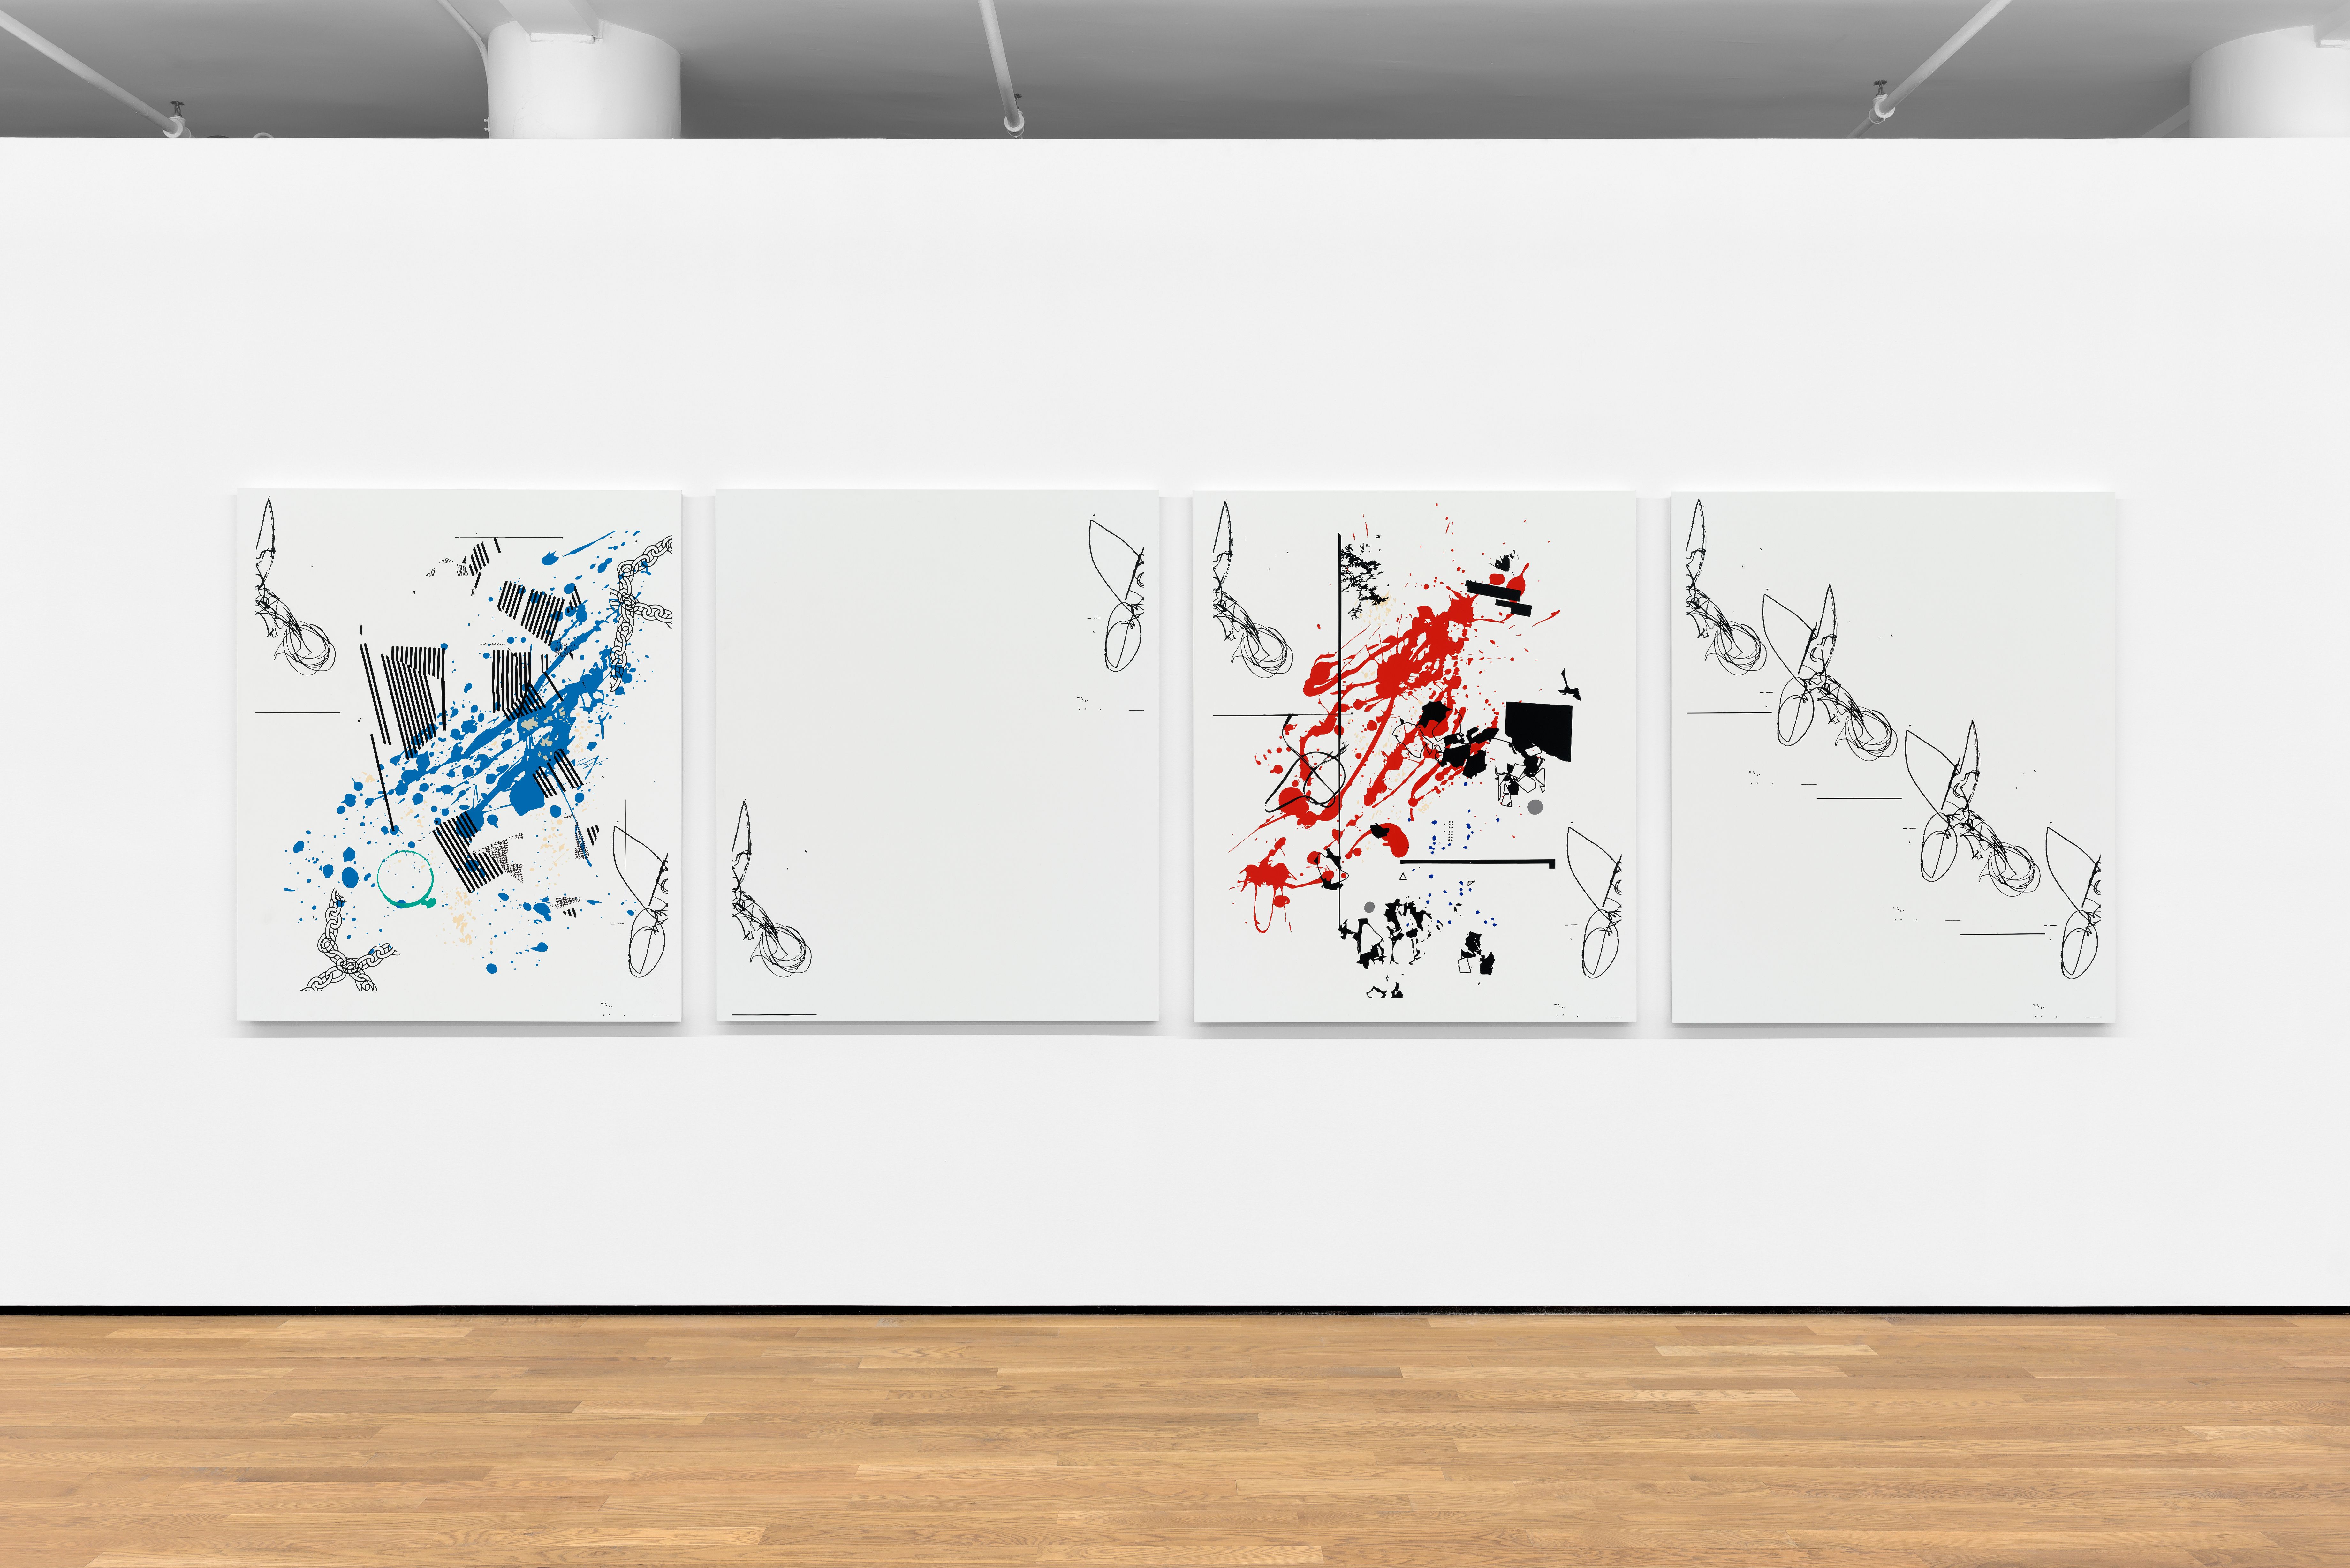 Michael Bell-Smith, Cut (Blue Splash, Spacer, Red Splash, Repeat), 2017, machine cut vinyl on Dibond (in four panels), 54 x 45 in. (137.16 x 114.3 cm.) each, overall dimensions variable